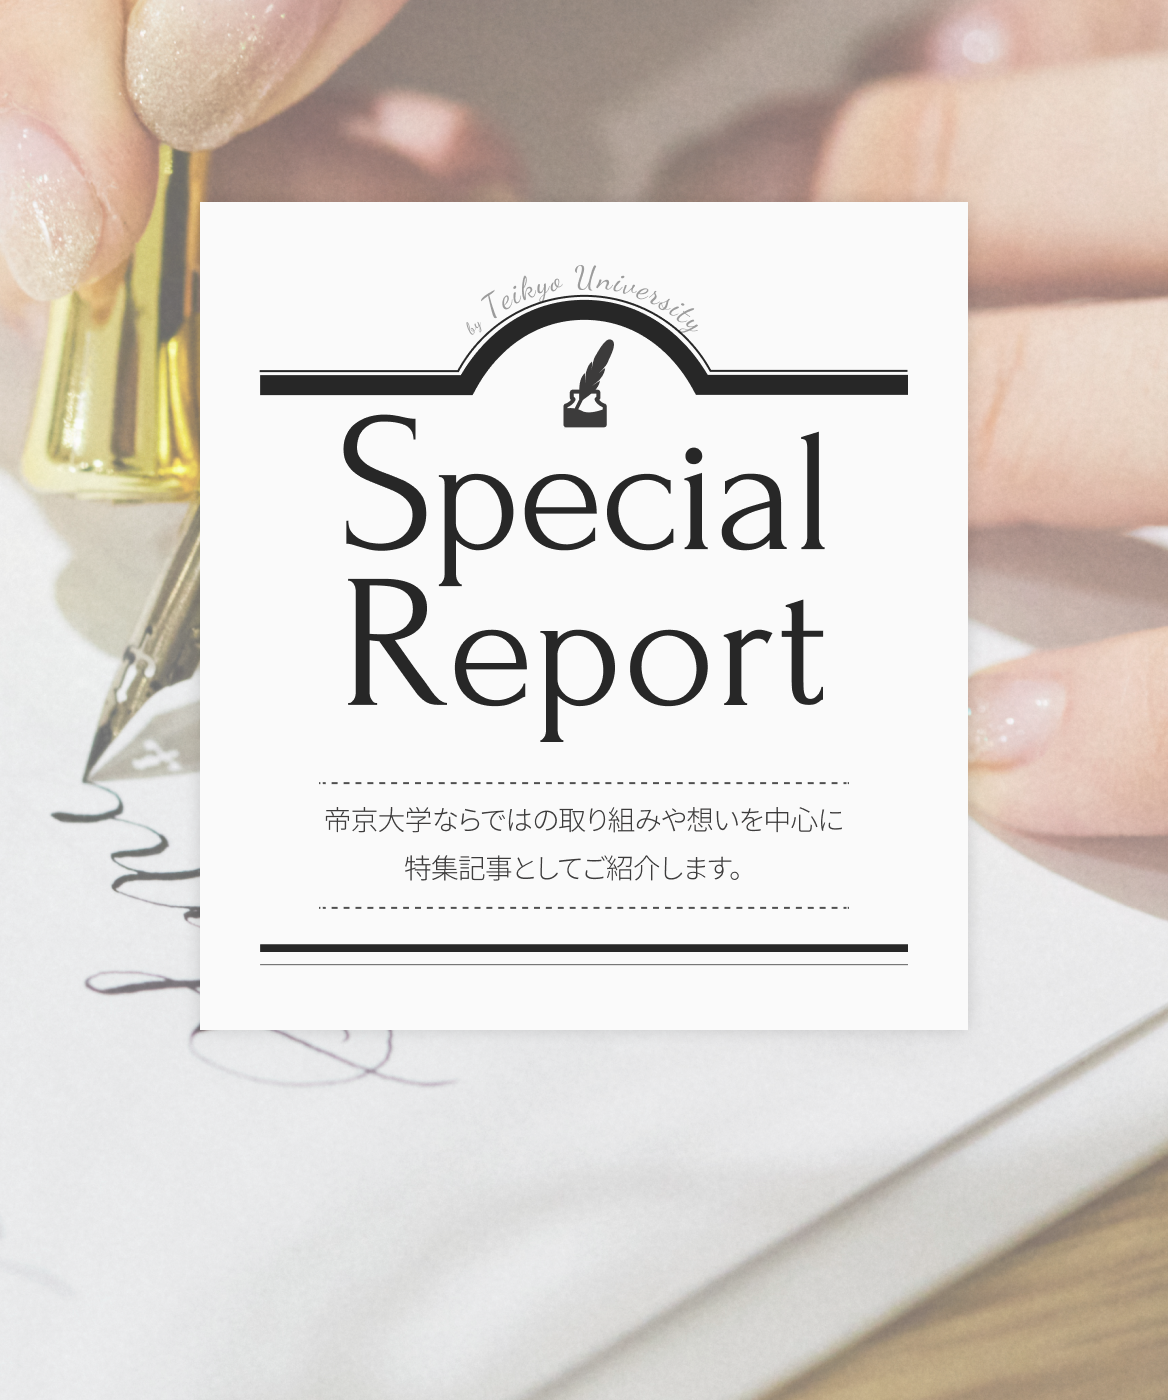 Special Report We will introduce a special feature article focusing on initiatives and ideas unique to Teikyo University.